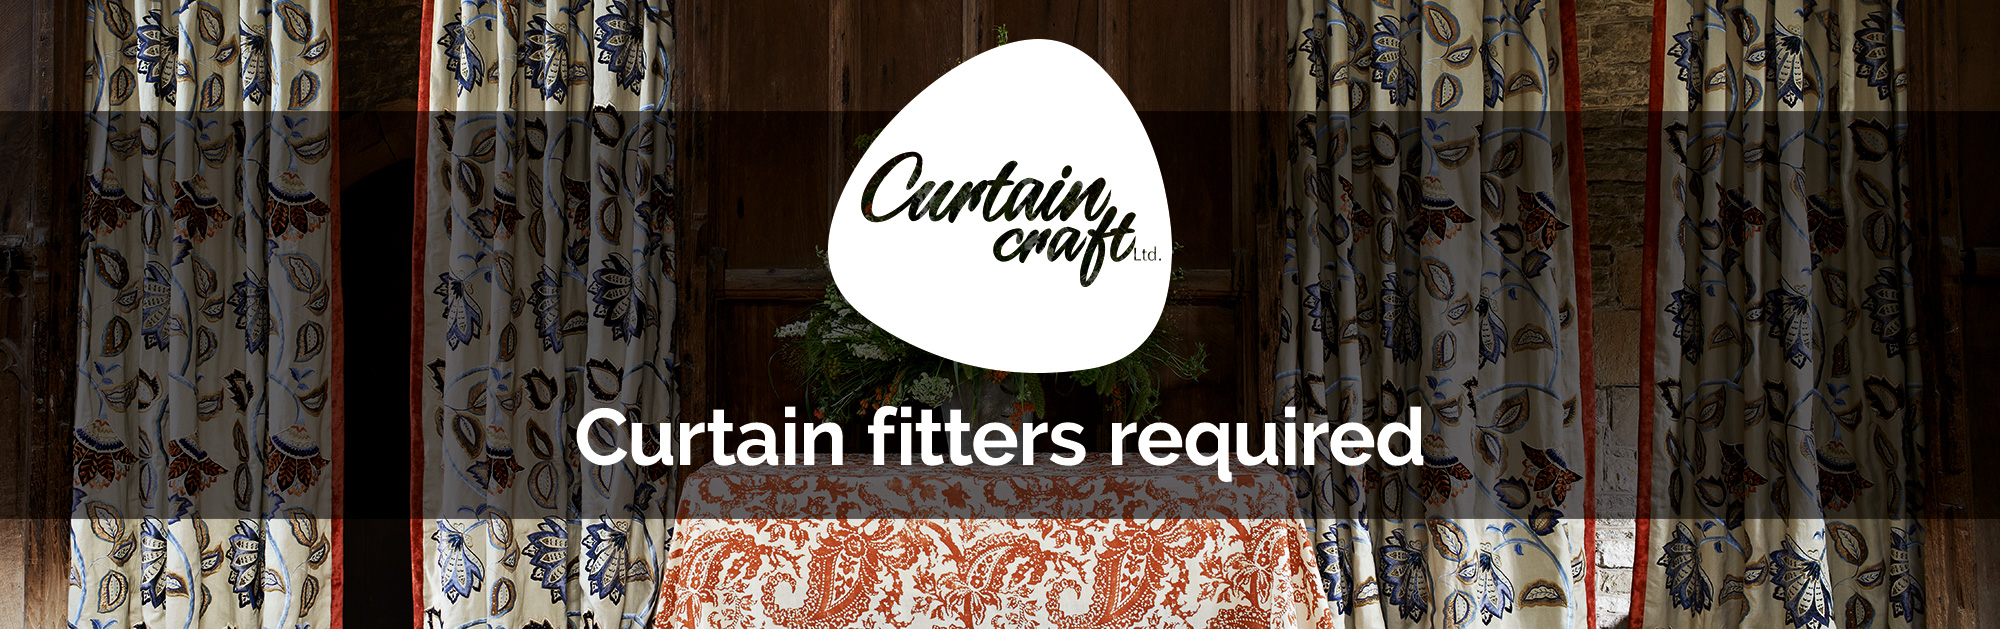 Curtain fitters required - Curtaincraft, Sussex, Surrey, Kent, London